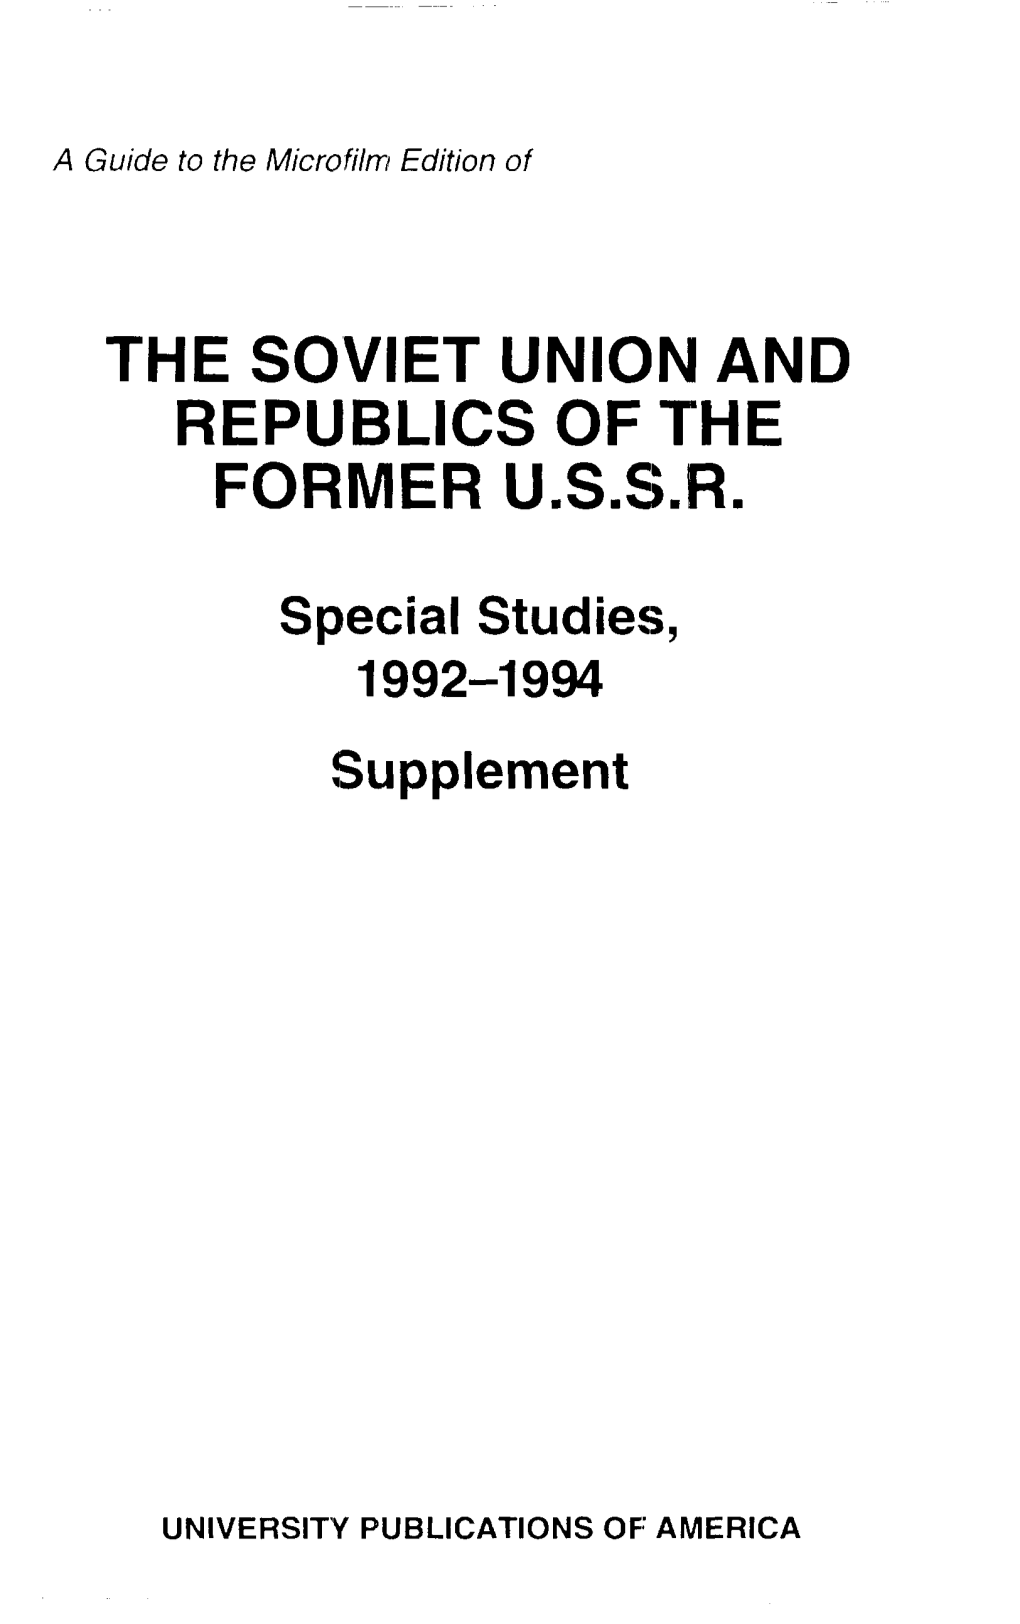 The Soviet Union and Republics of the Former U.S.S.R